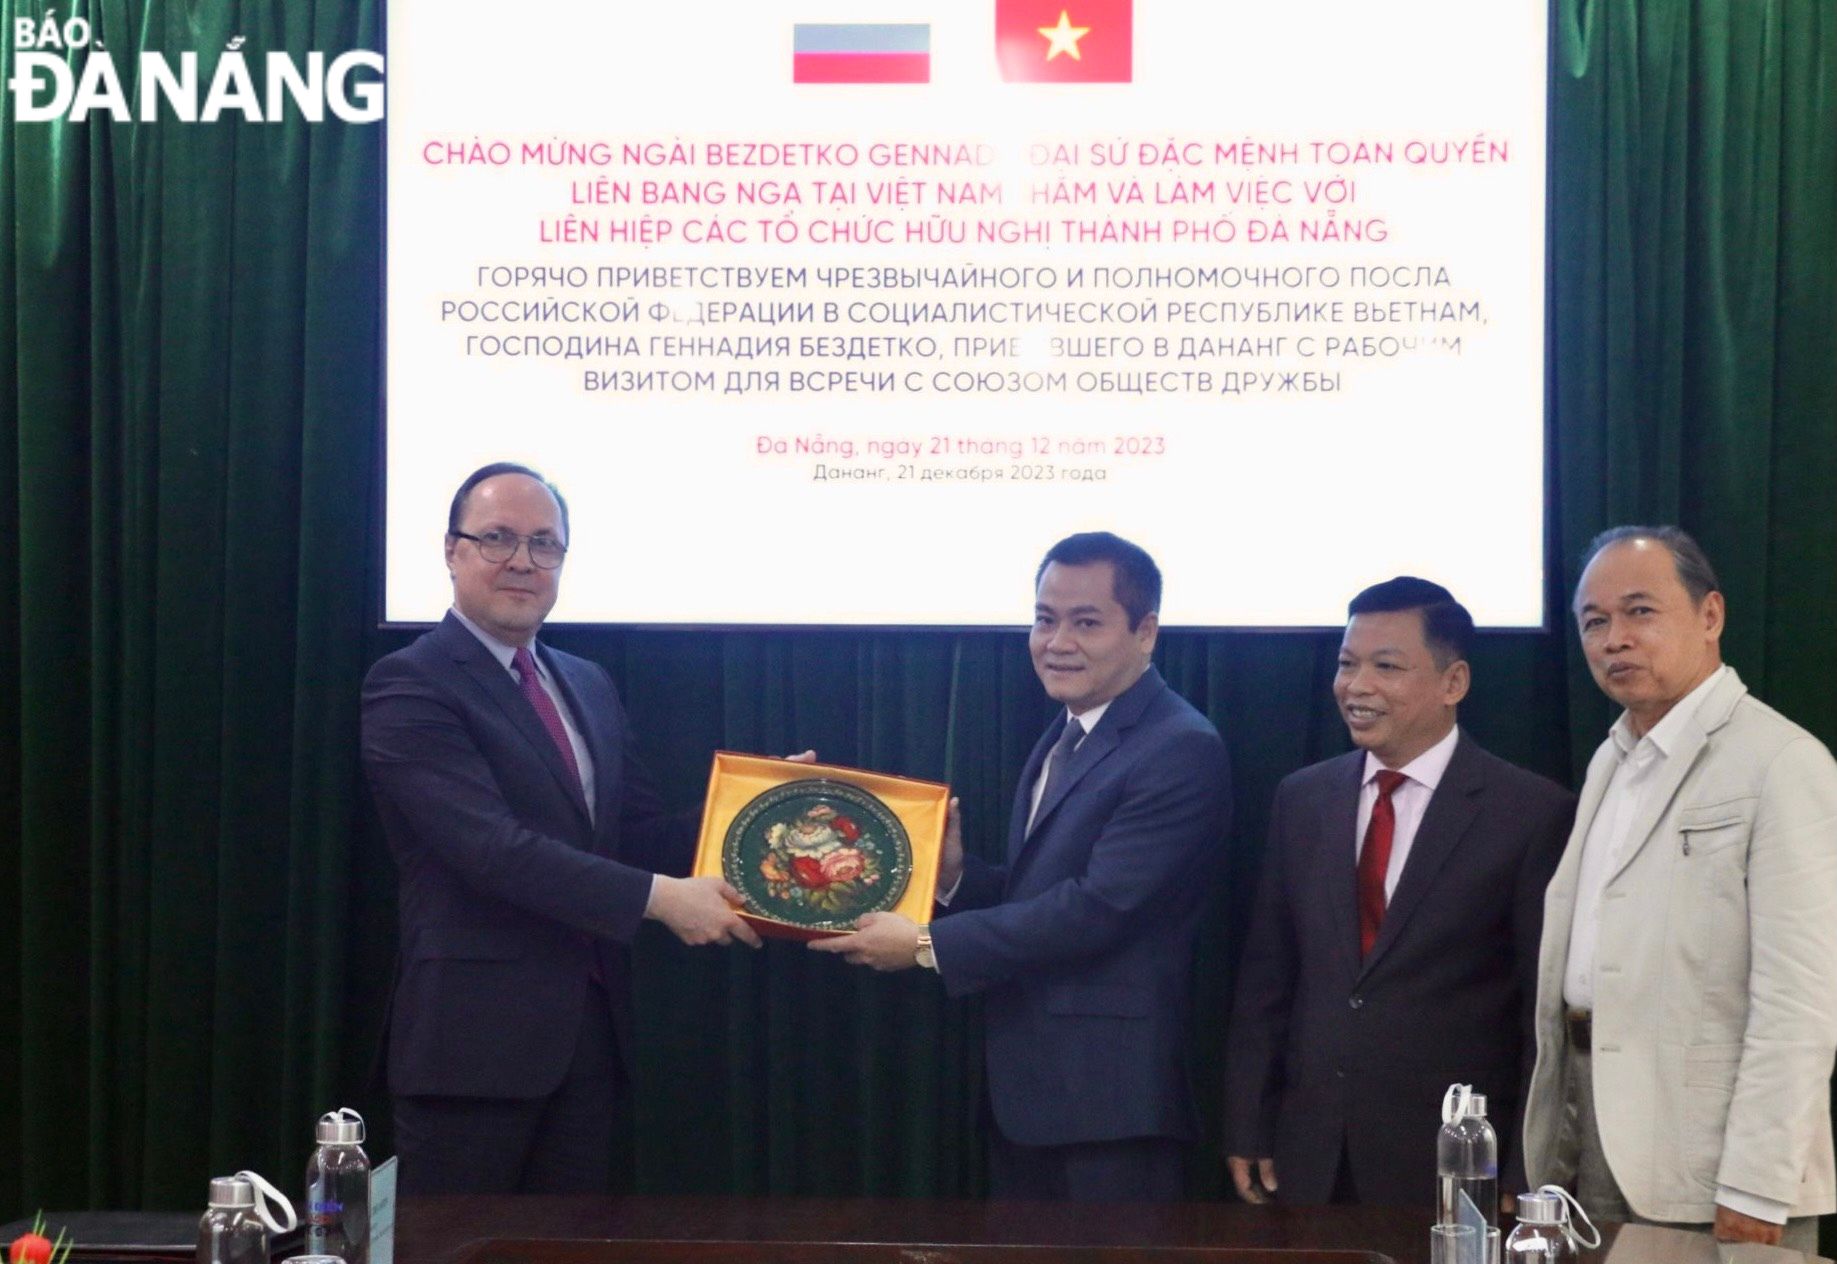 Russian Ambassador to Viet Nam Bezdetko Gennady Stepanovich (left) presenting a souvenir to Chairman of the Da Nang Union of Friendship Organisations Nguyen Ngoc Binh (3rd from right). Photo: T.P